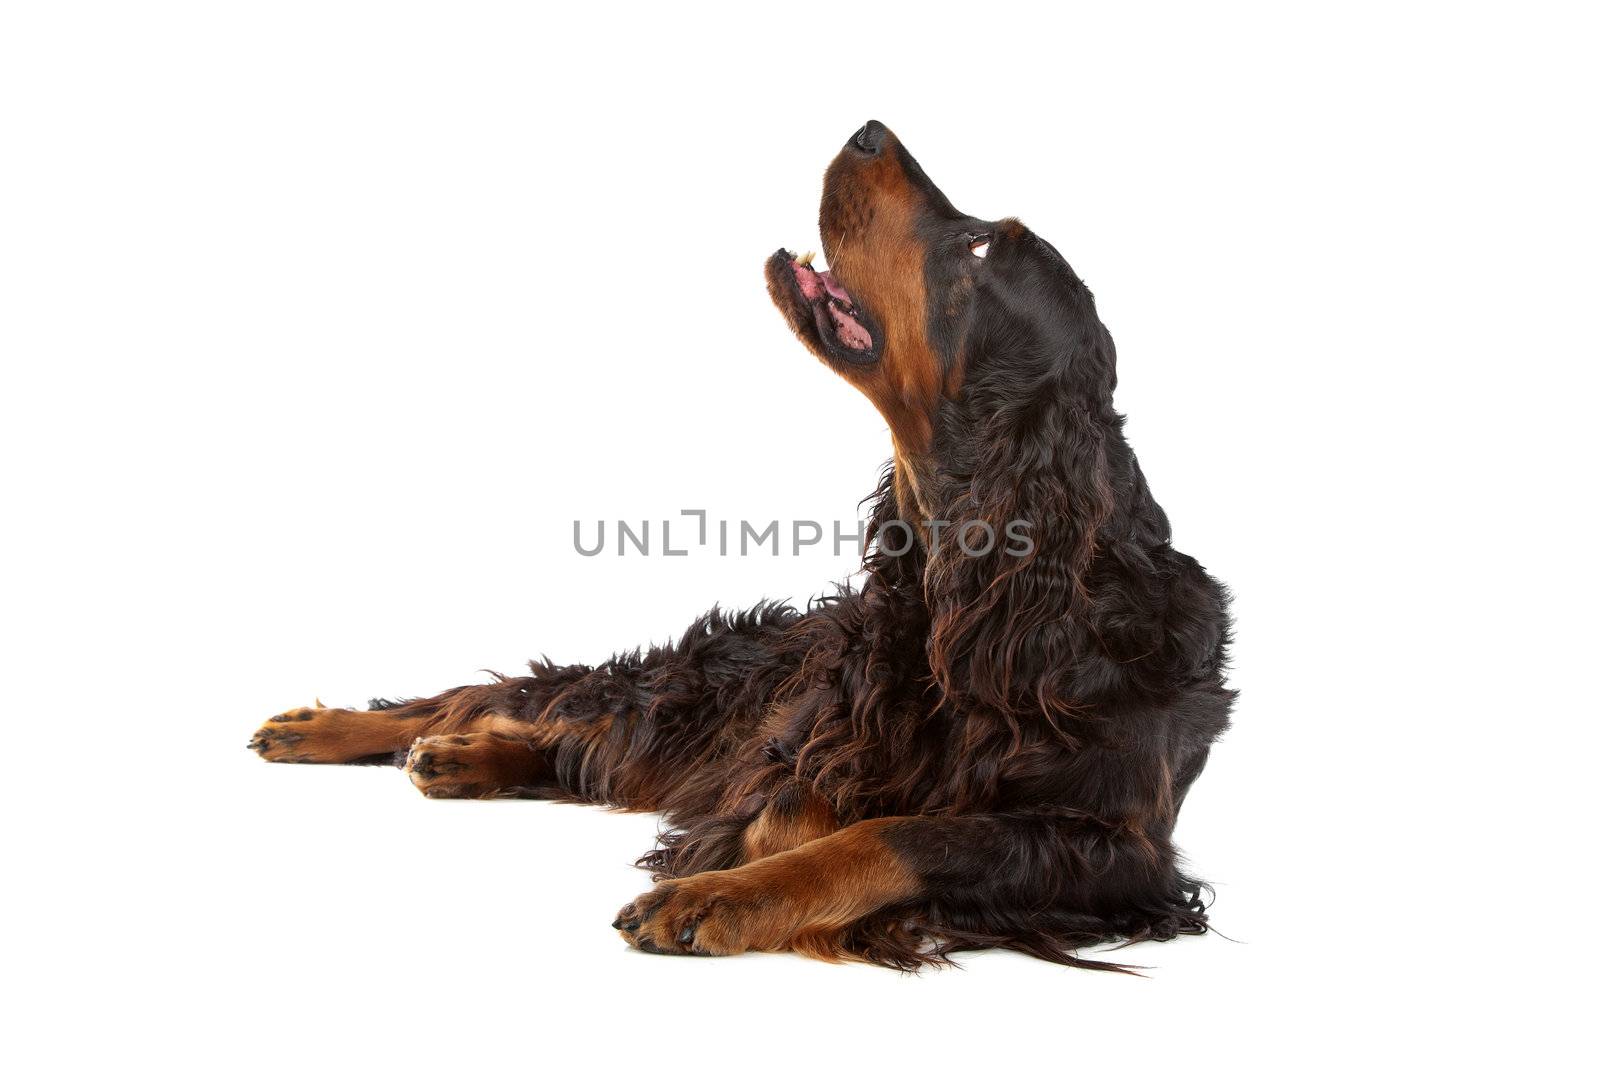 Irish Setter dog lying and looking up, on a white background